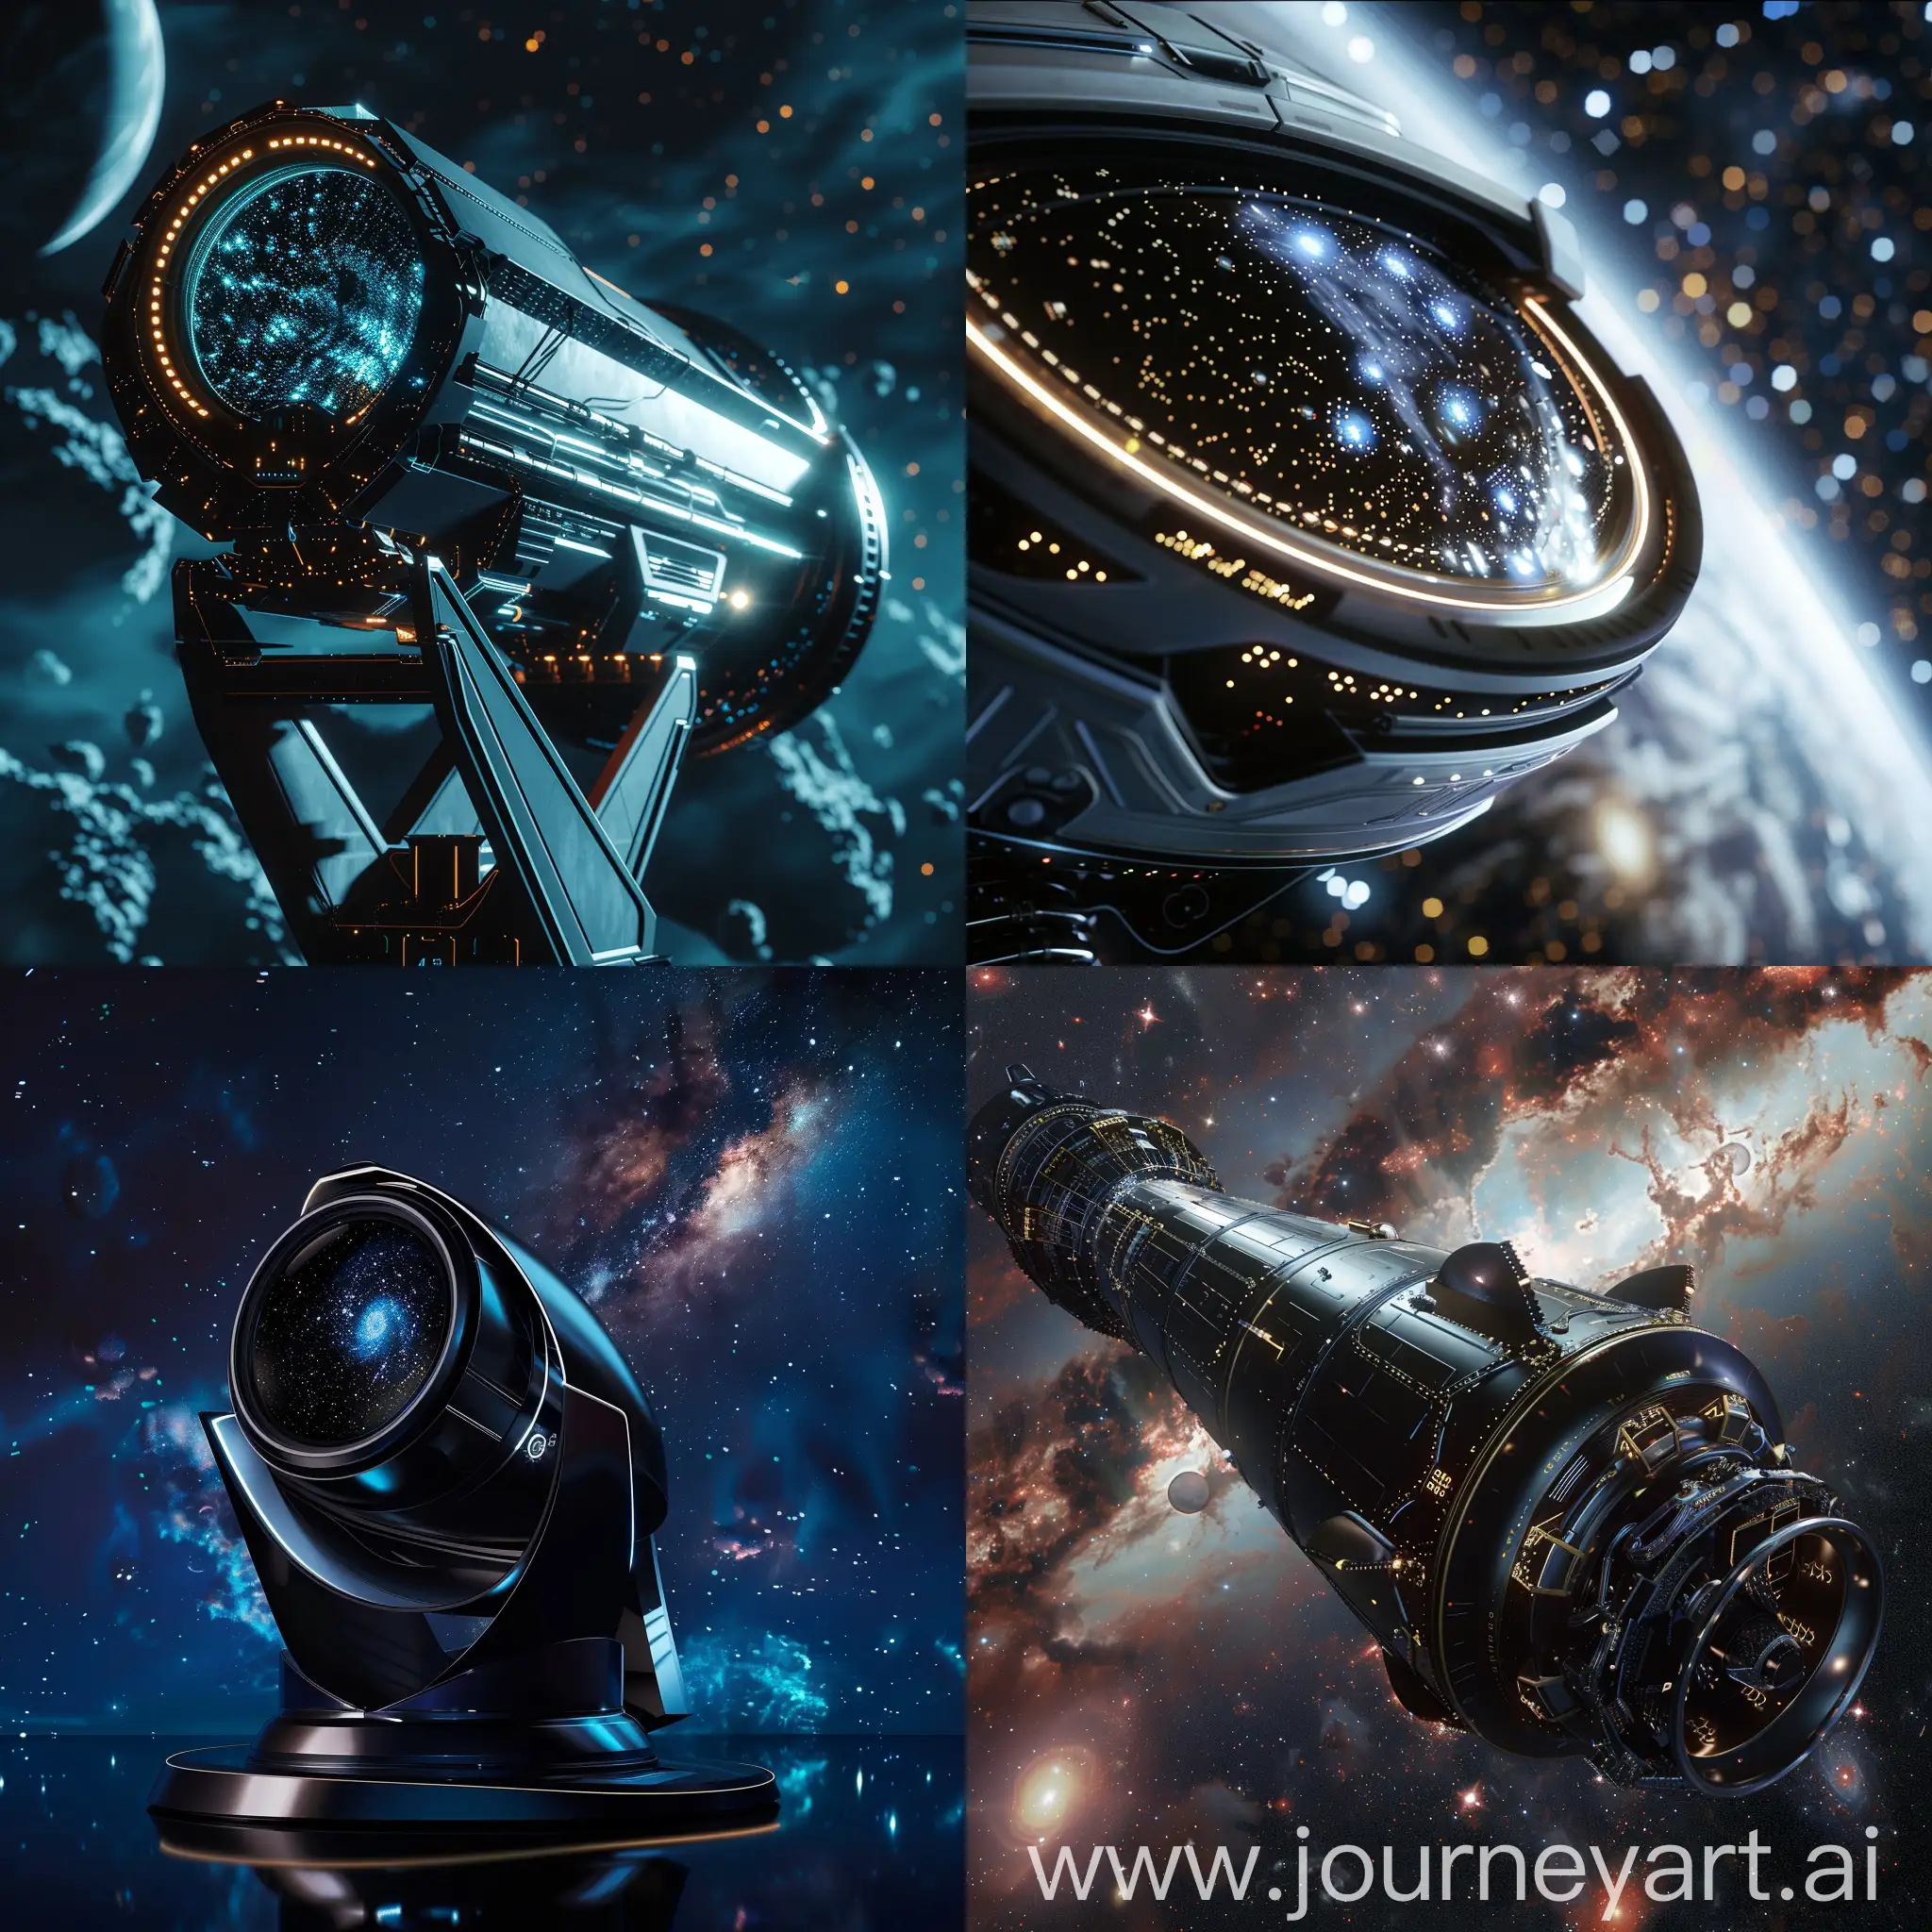 Futuristic-Space-Telescope-in-2100-with-Advanced-Technology-and-Galactic-Backdrop